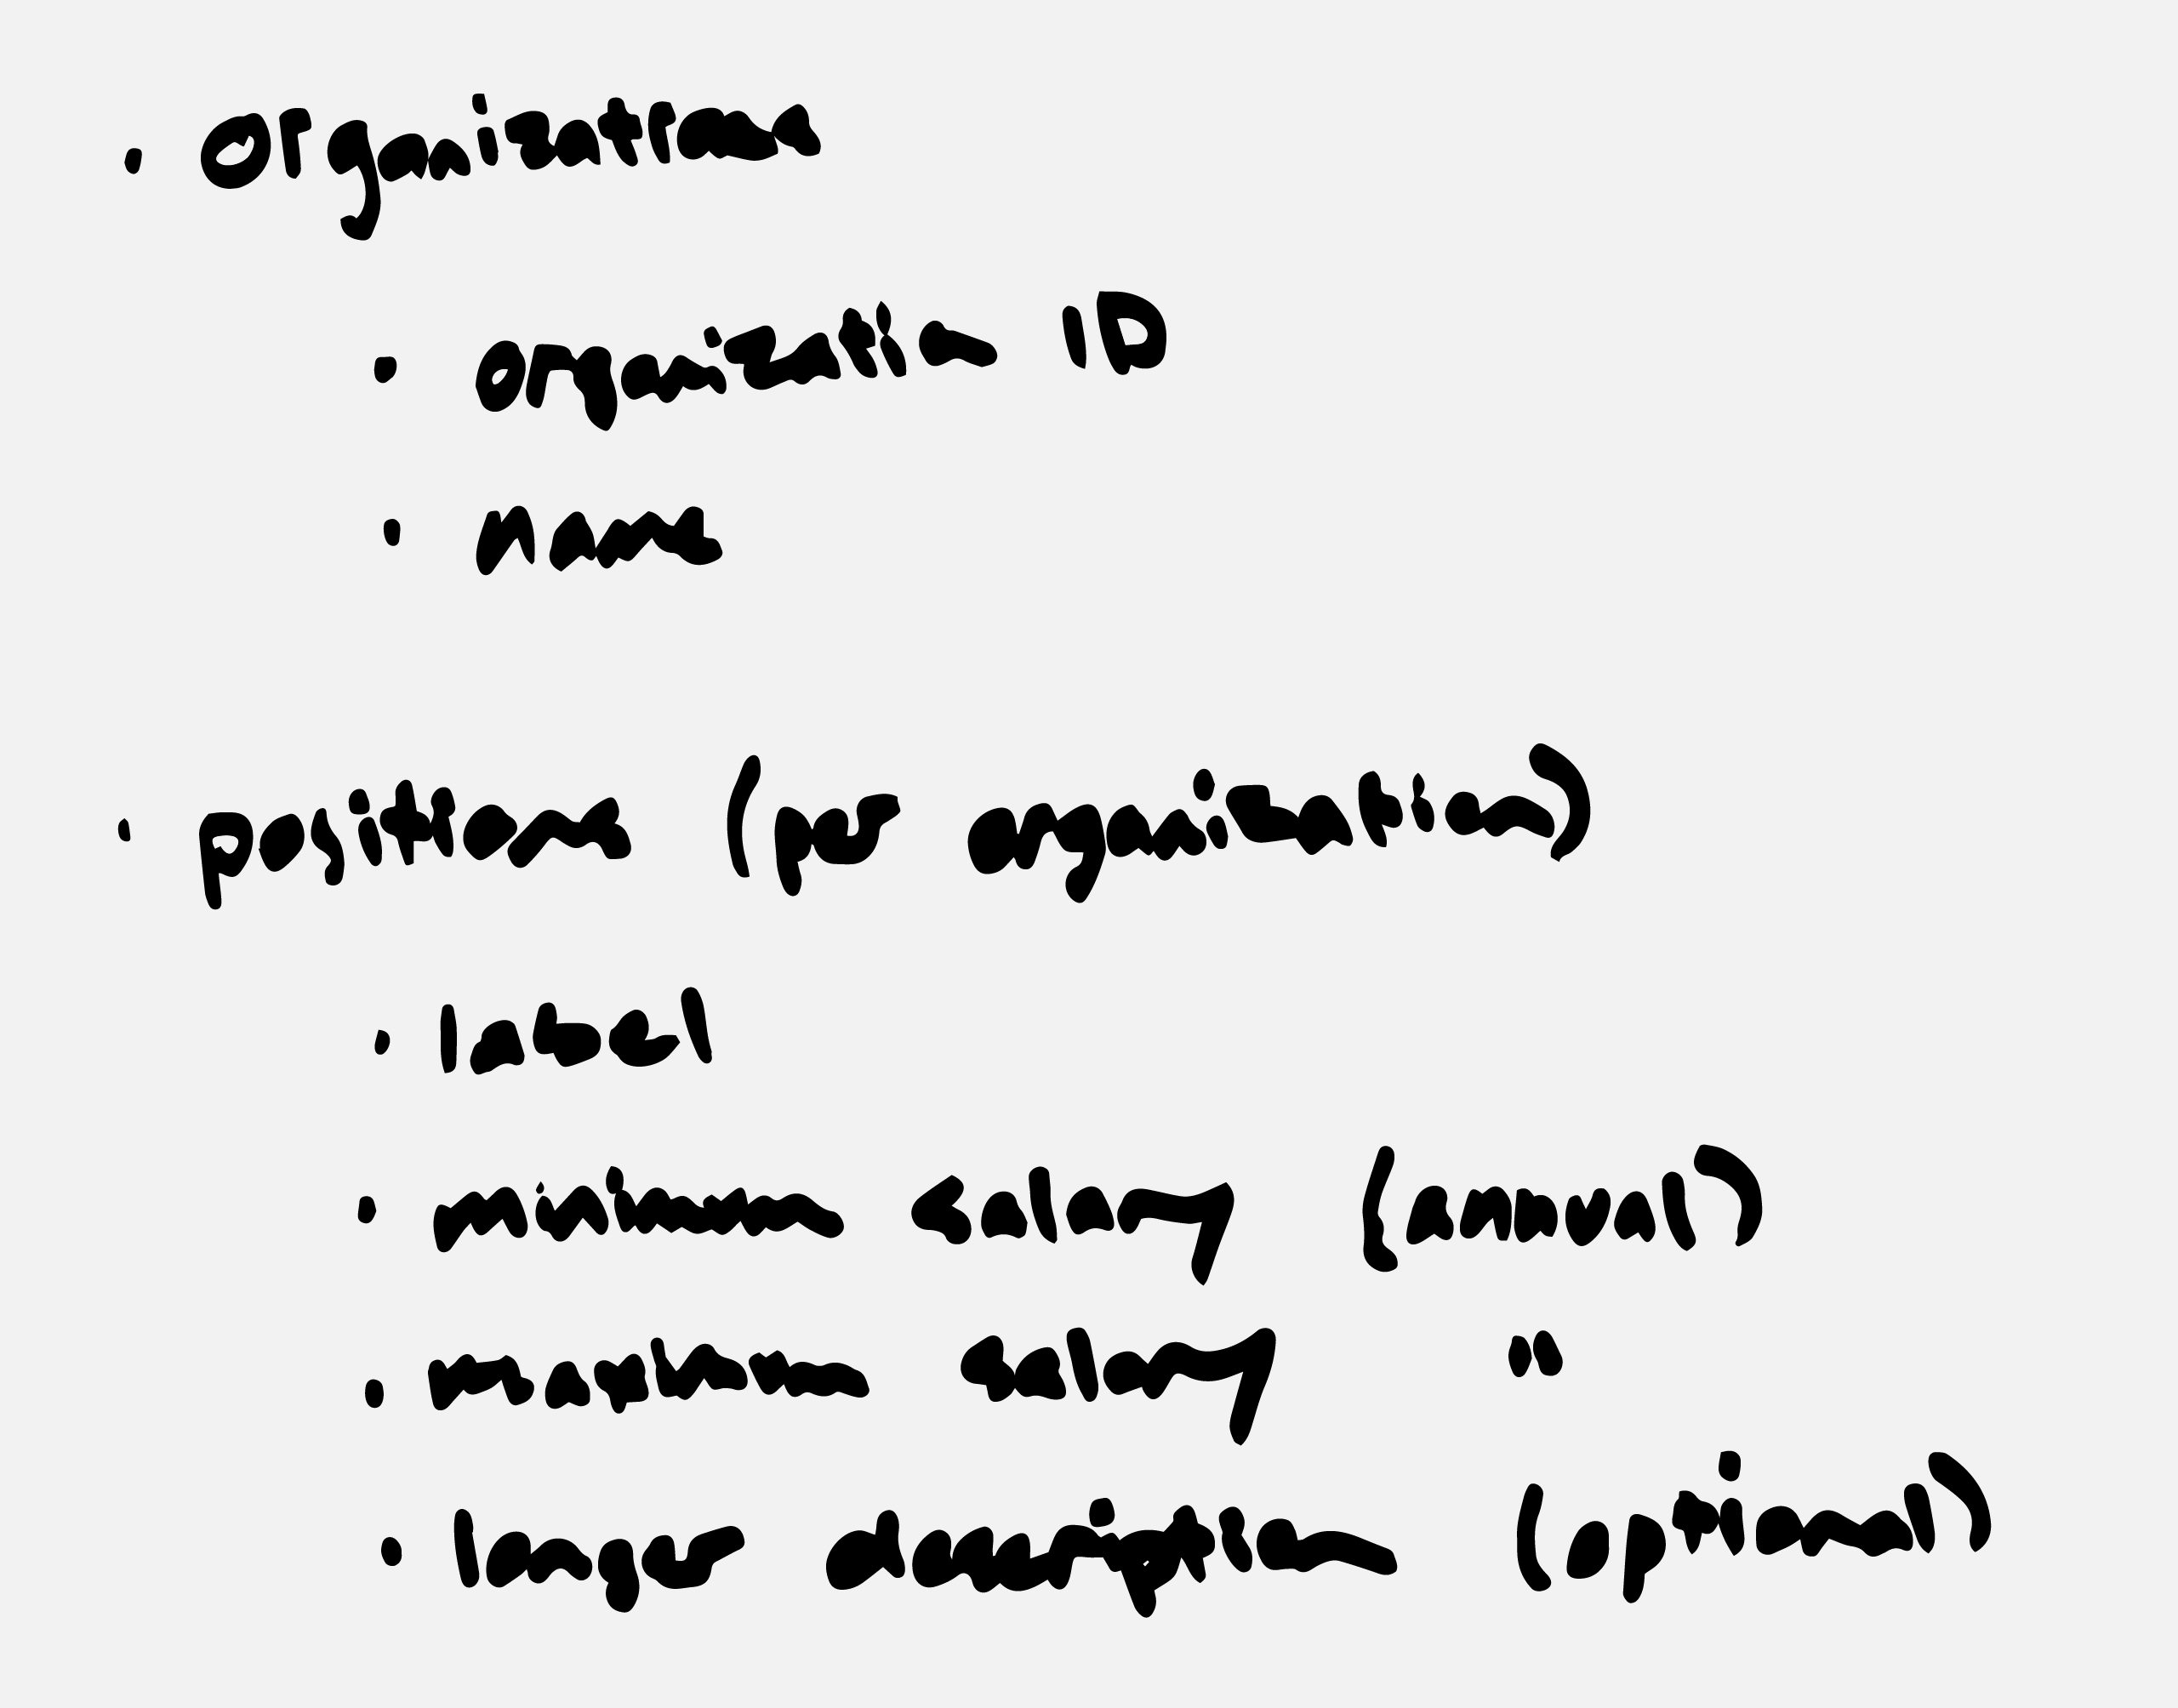 A hand-drawn bulleted list of data elements, including organizations with organization IDs and names; positions (per organization) with labels, minimum and maximum salaries, and longer descriptions.